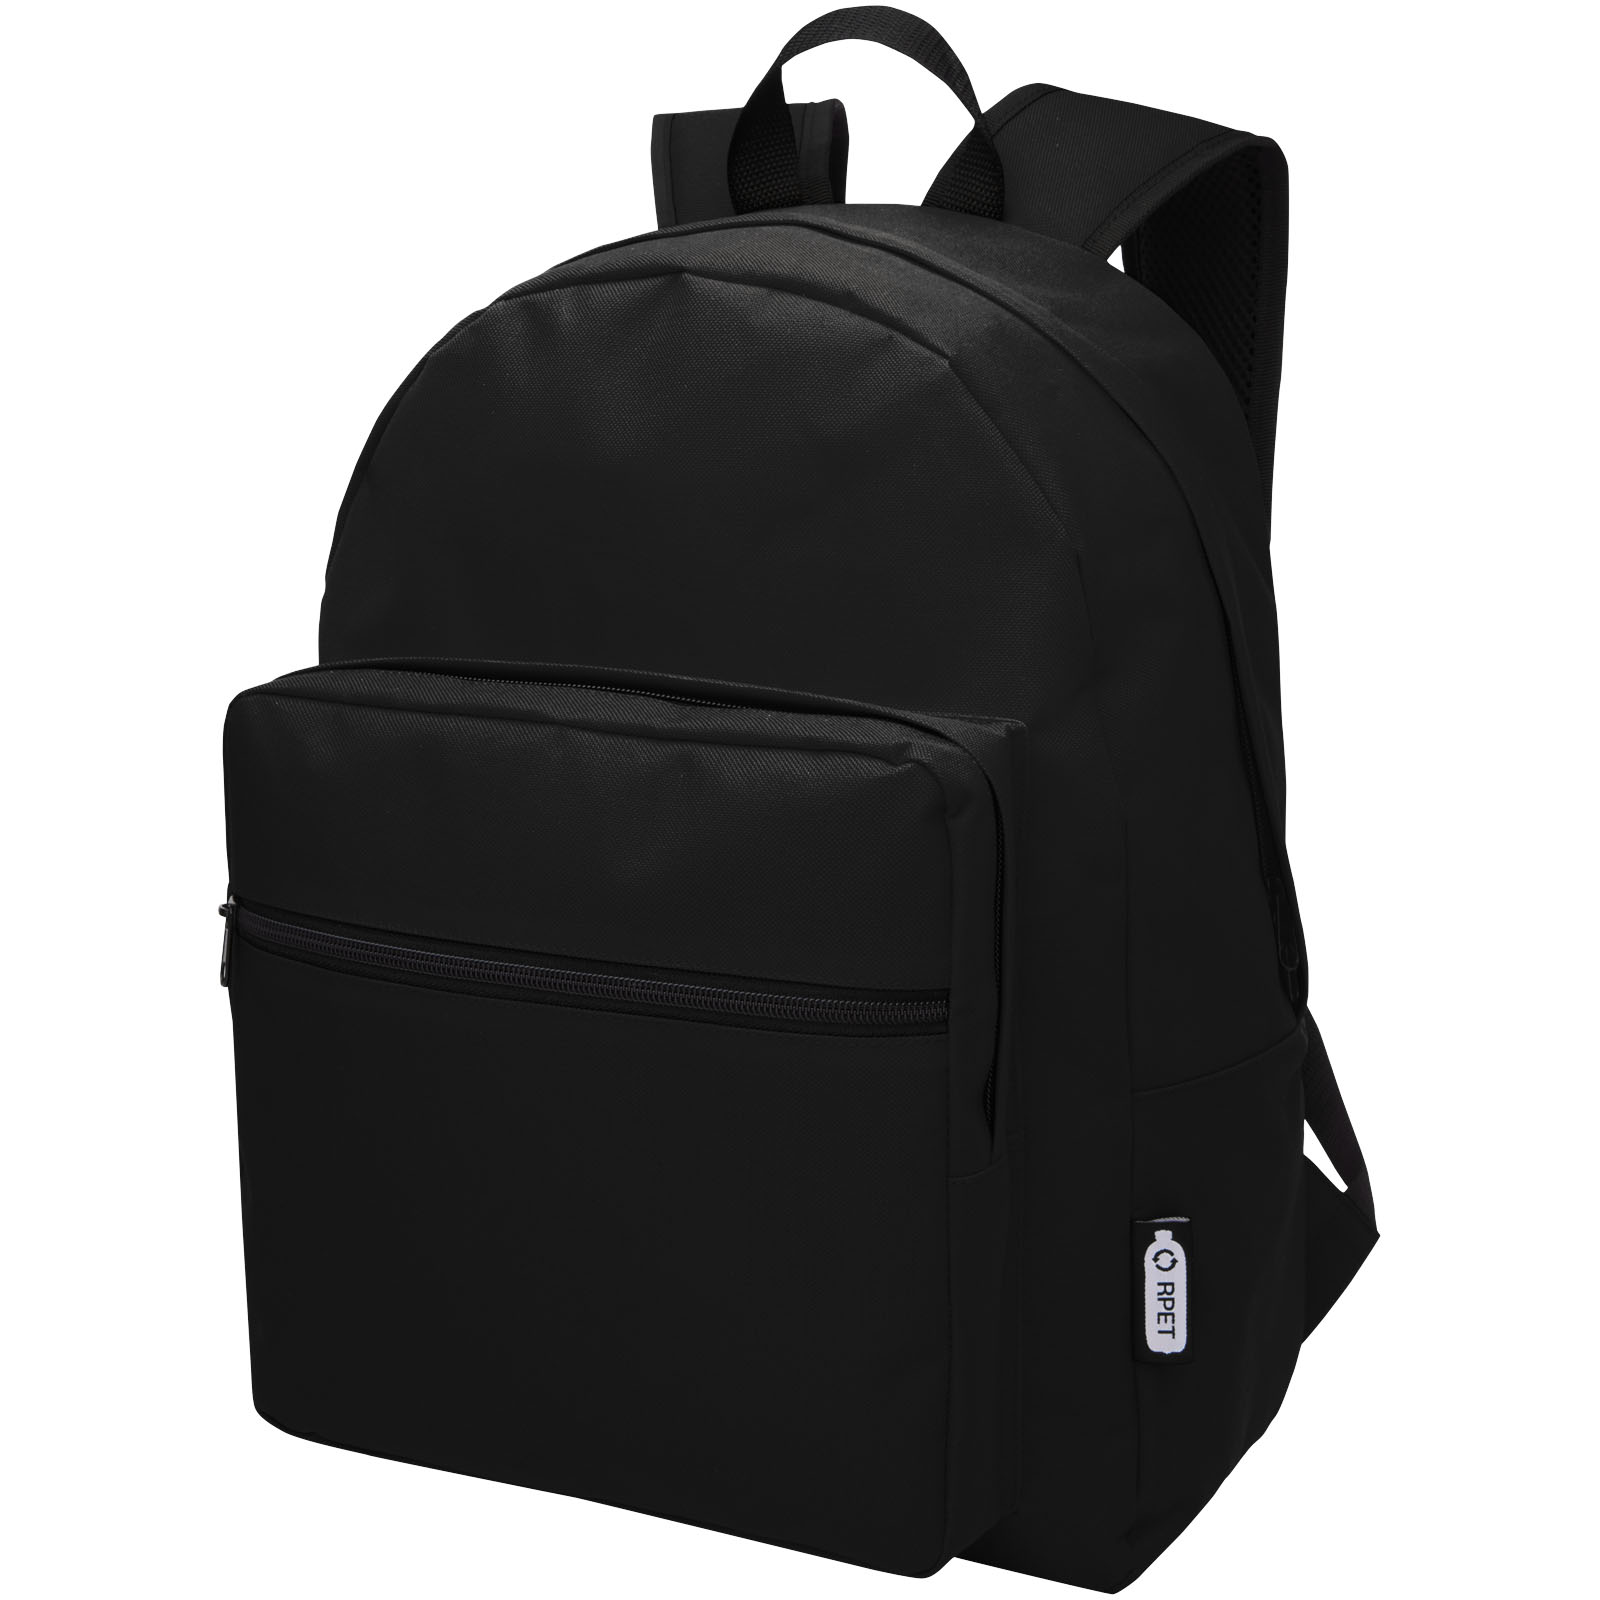 Polyester backpack JONE recycled material